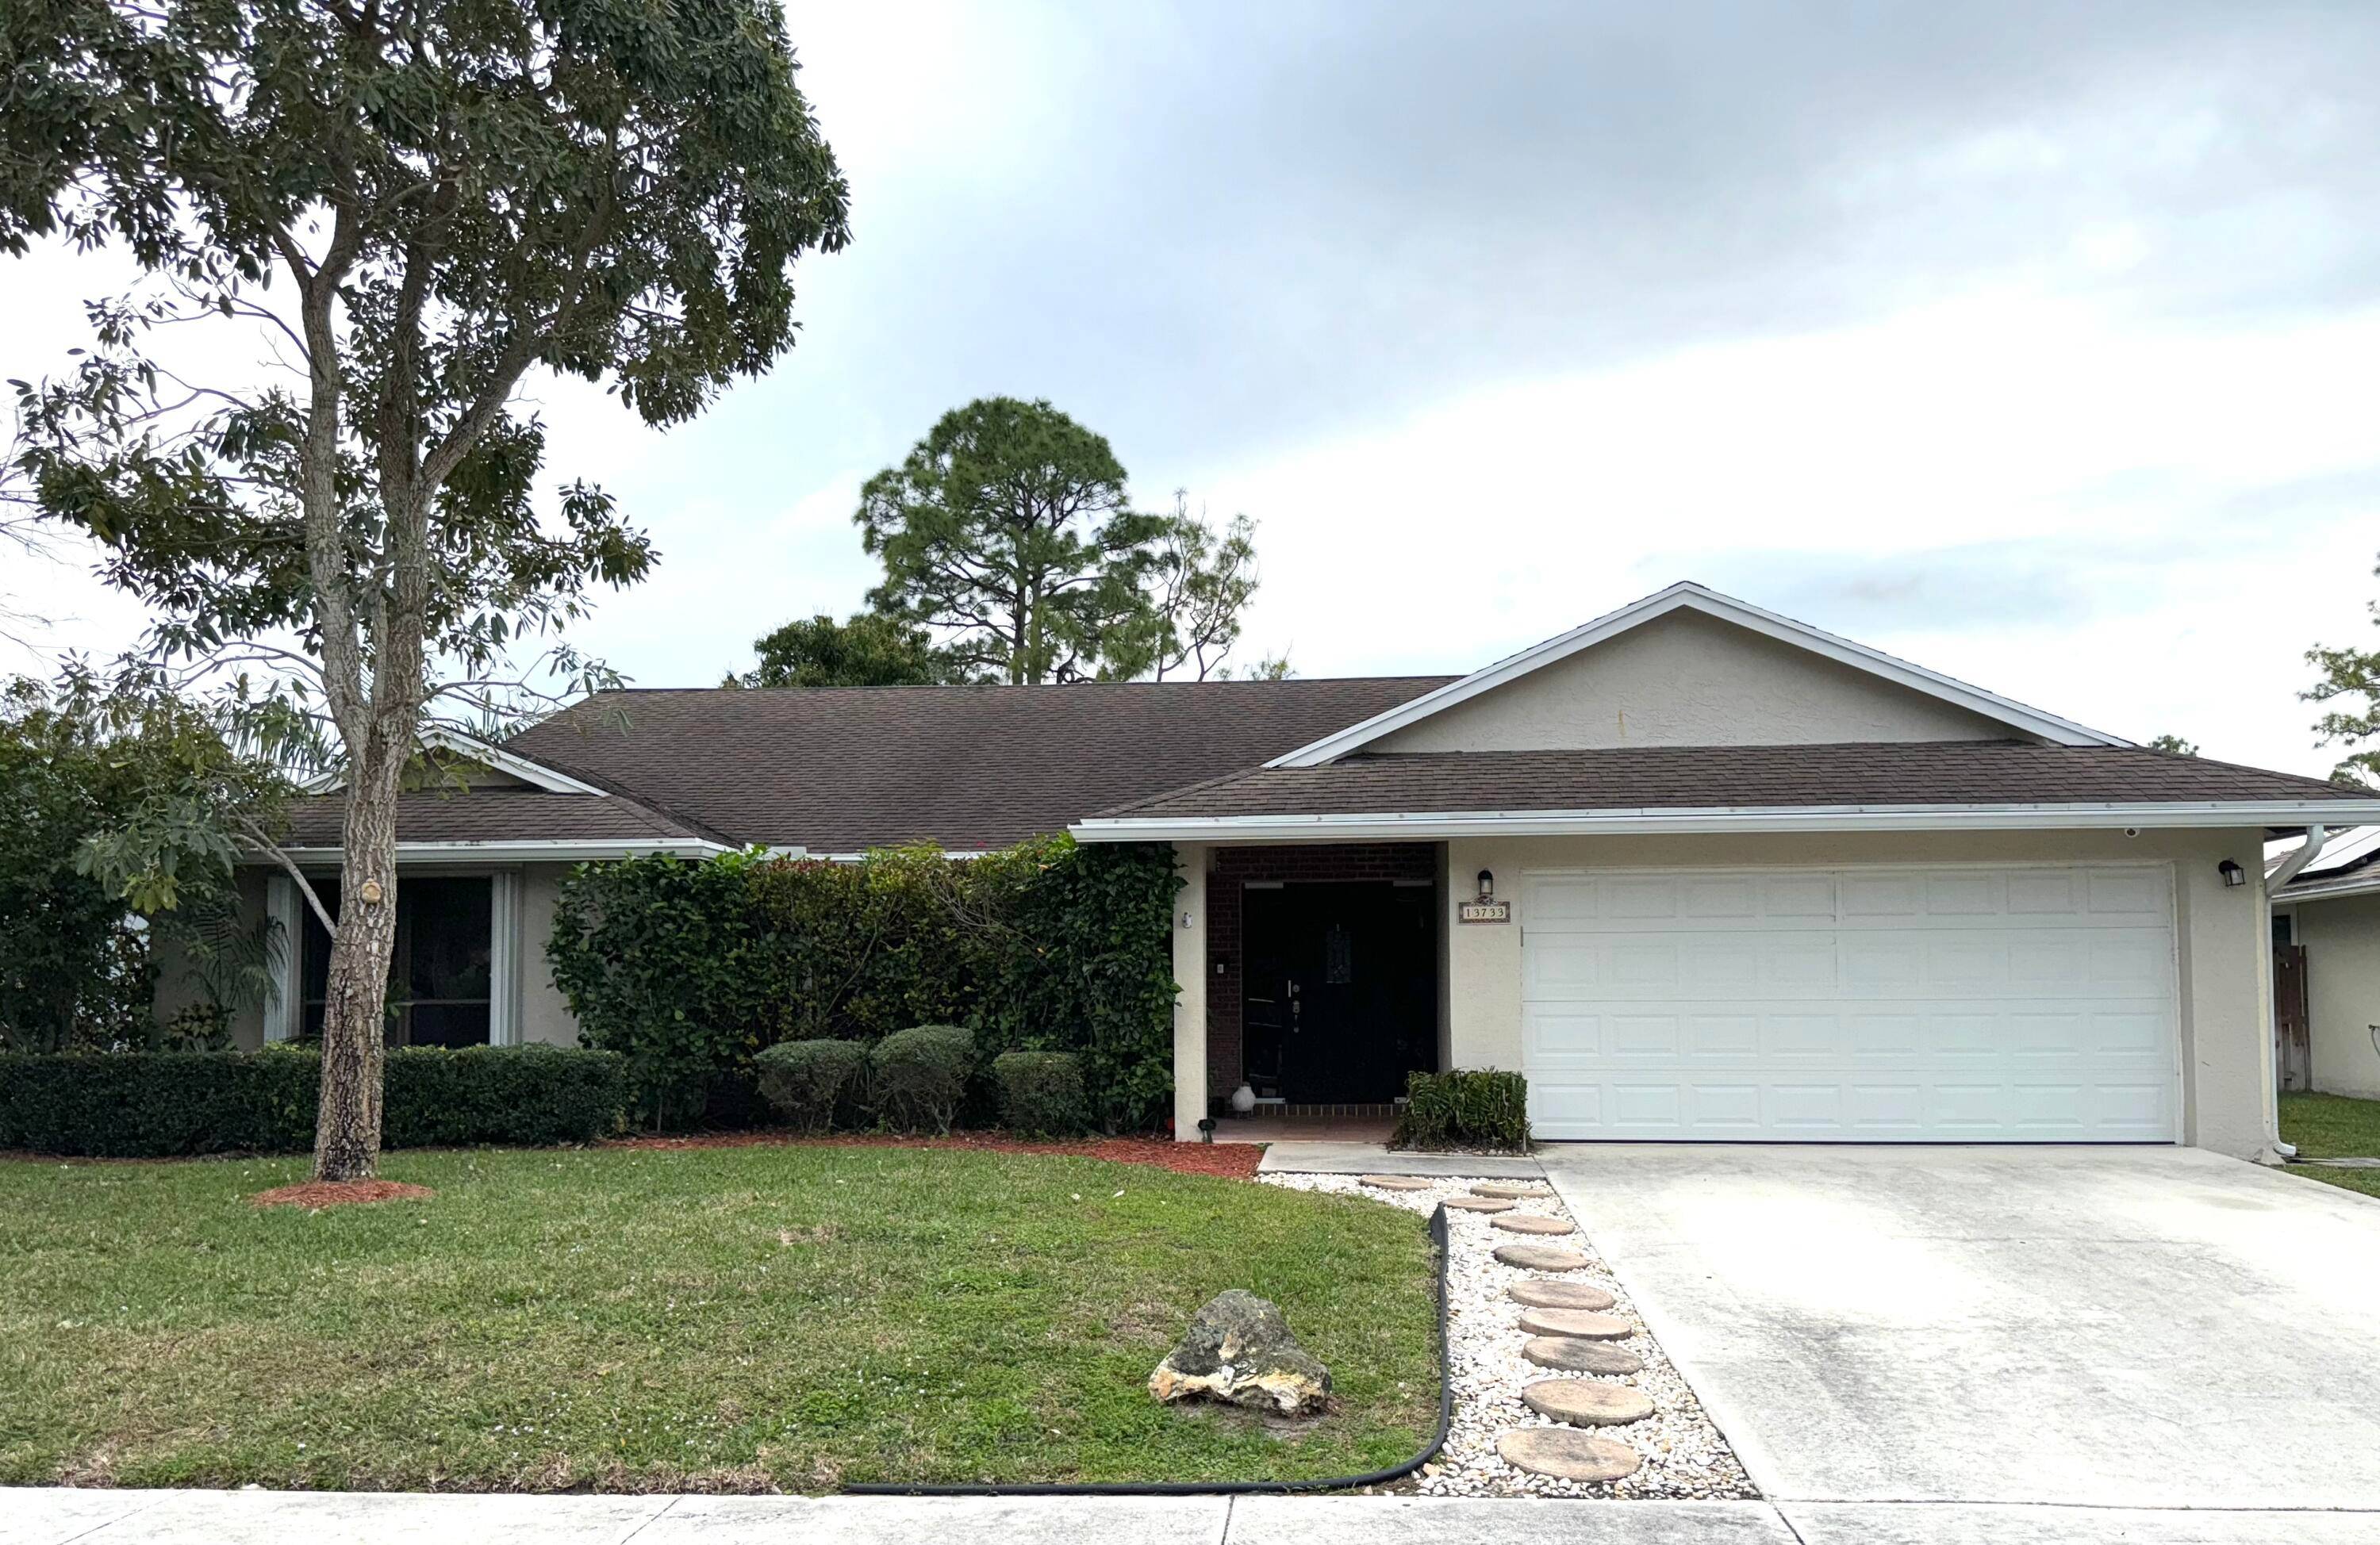 NO HOA ! IN THE HEART OF WELLINGTON, 3 2 HOUSE PORCELAIN TILE THRU OUT EXCEPT FOR BEDROOMS, ROOM FOR POOL, GRANITE TOPS IN KITCHEN SS APPLIANCES, ETC.